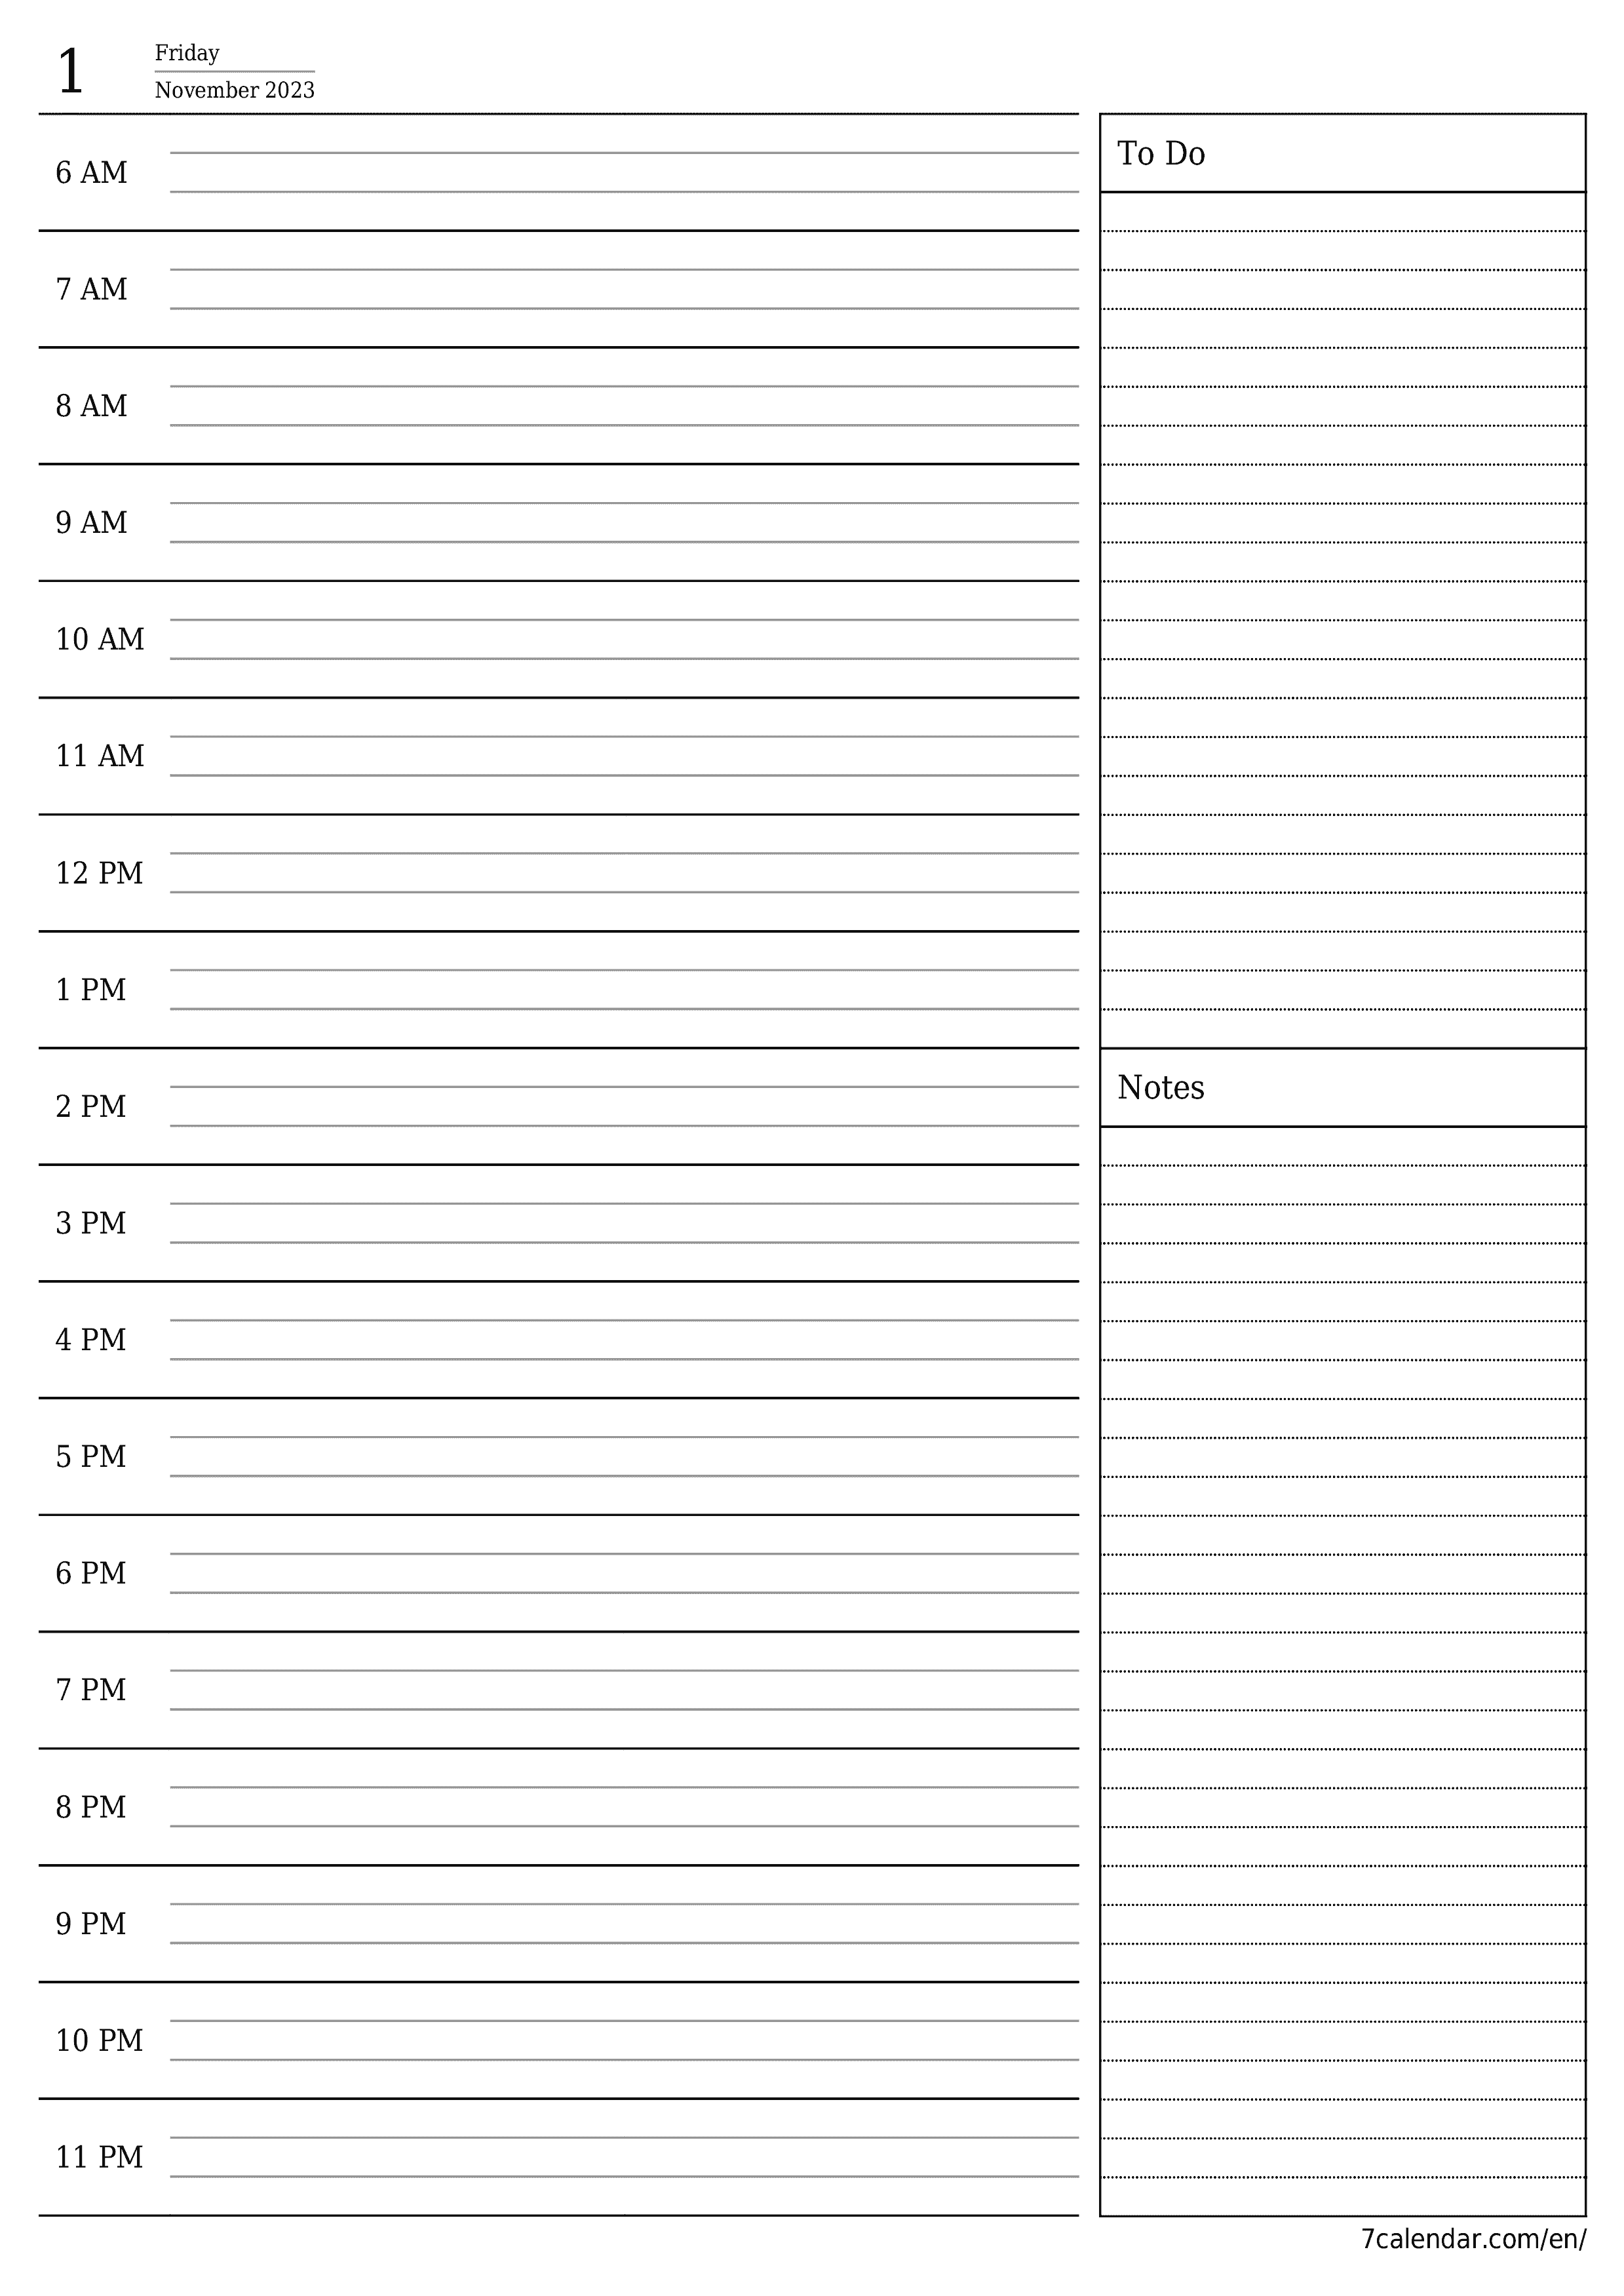 Blank daily calendar planner for day November 2023 with notes, save and print to PDF PNG English - 7calendar.com